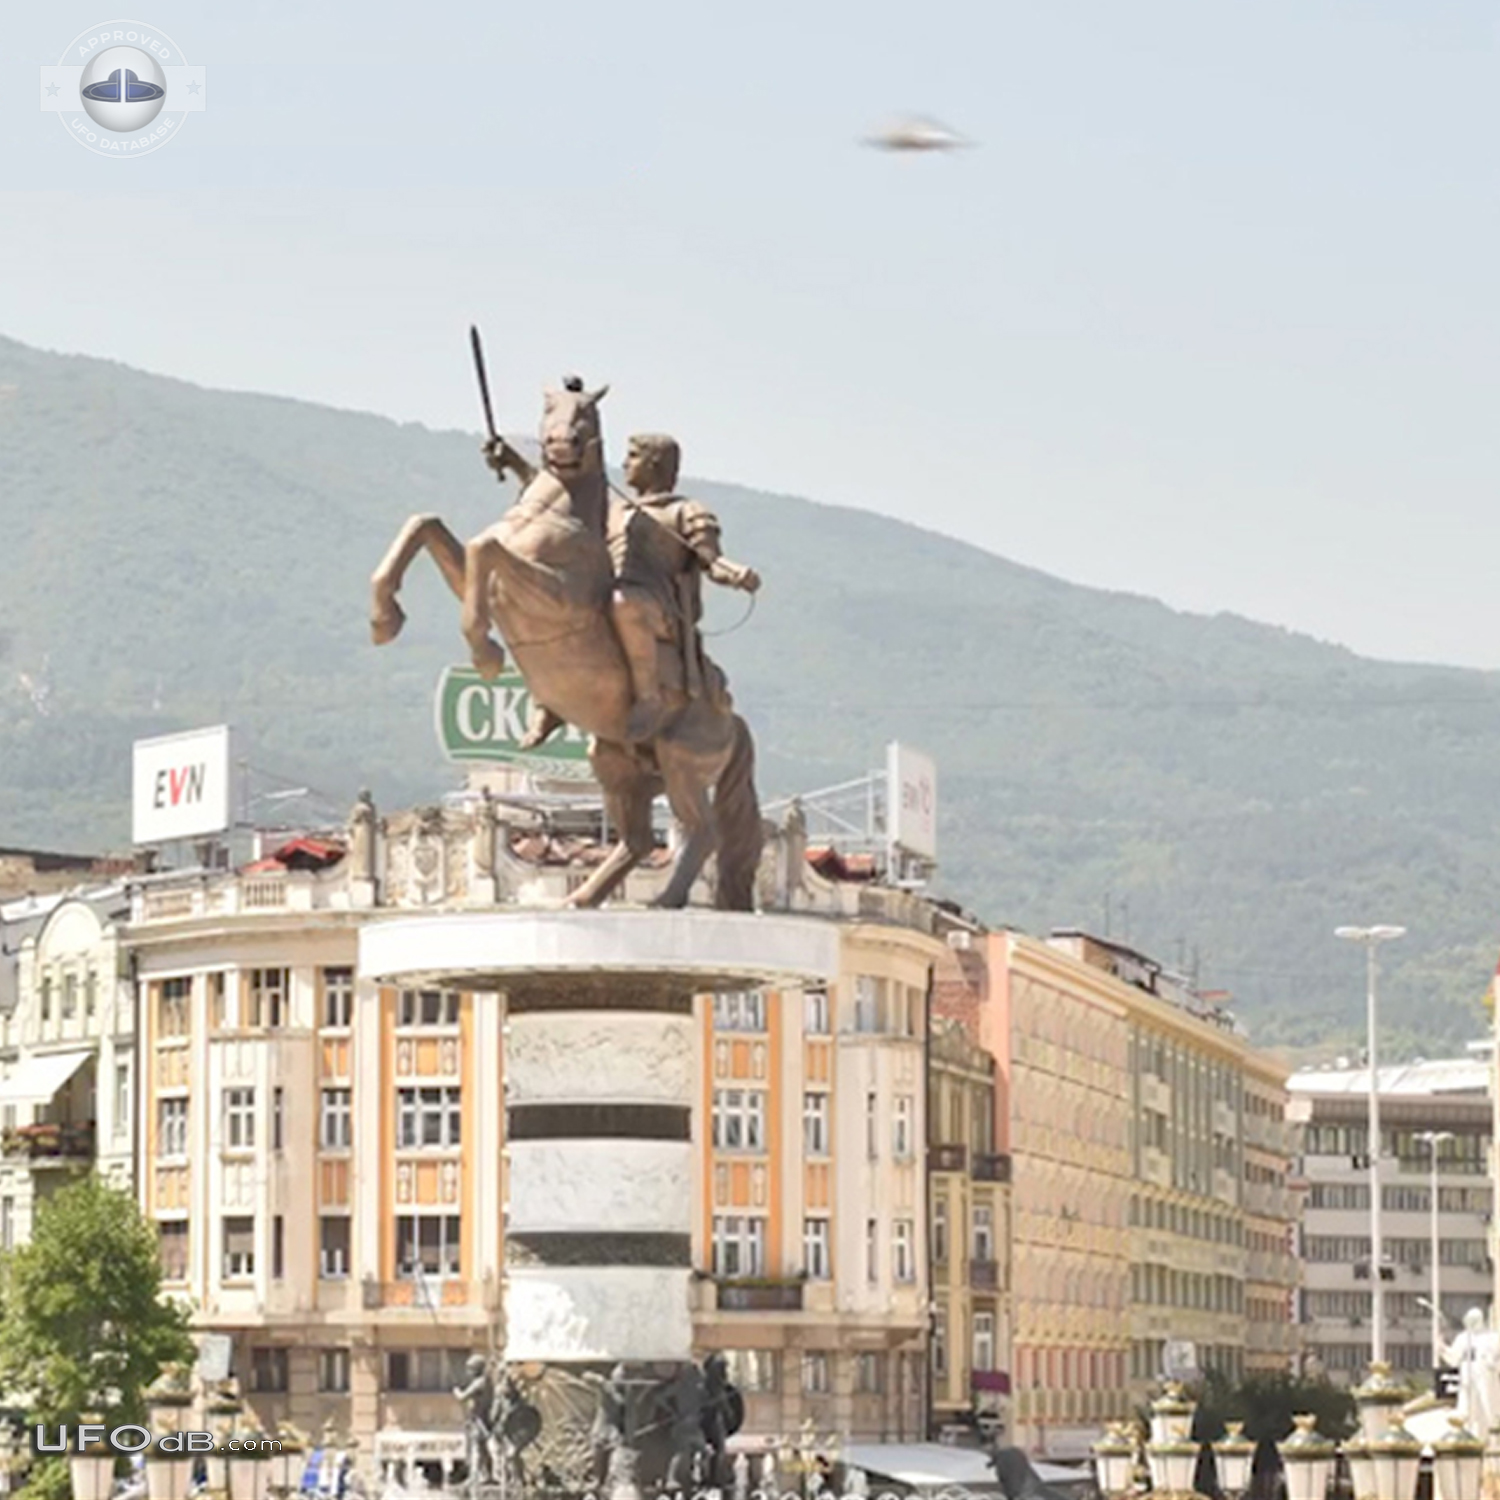 Triangular UFO passed over Warrior on a horse statue in Skopje Macedon UFO Picture #847-5